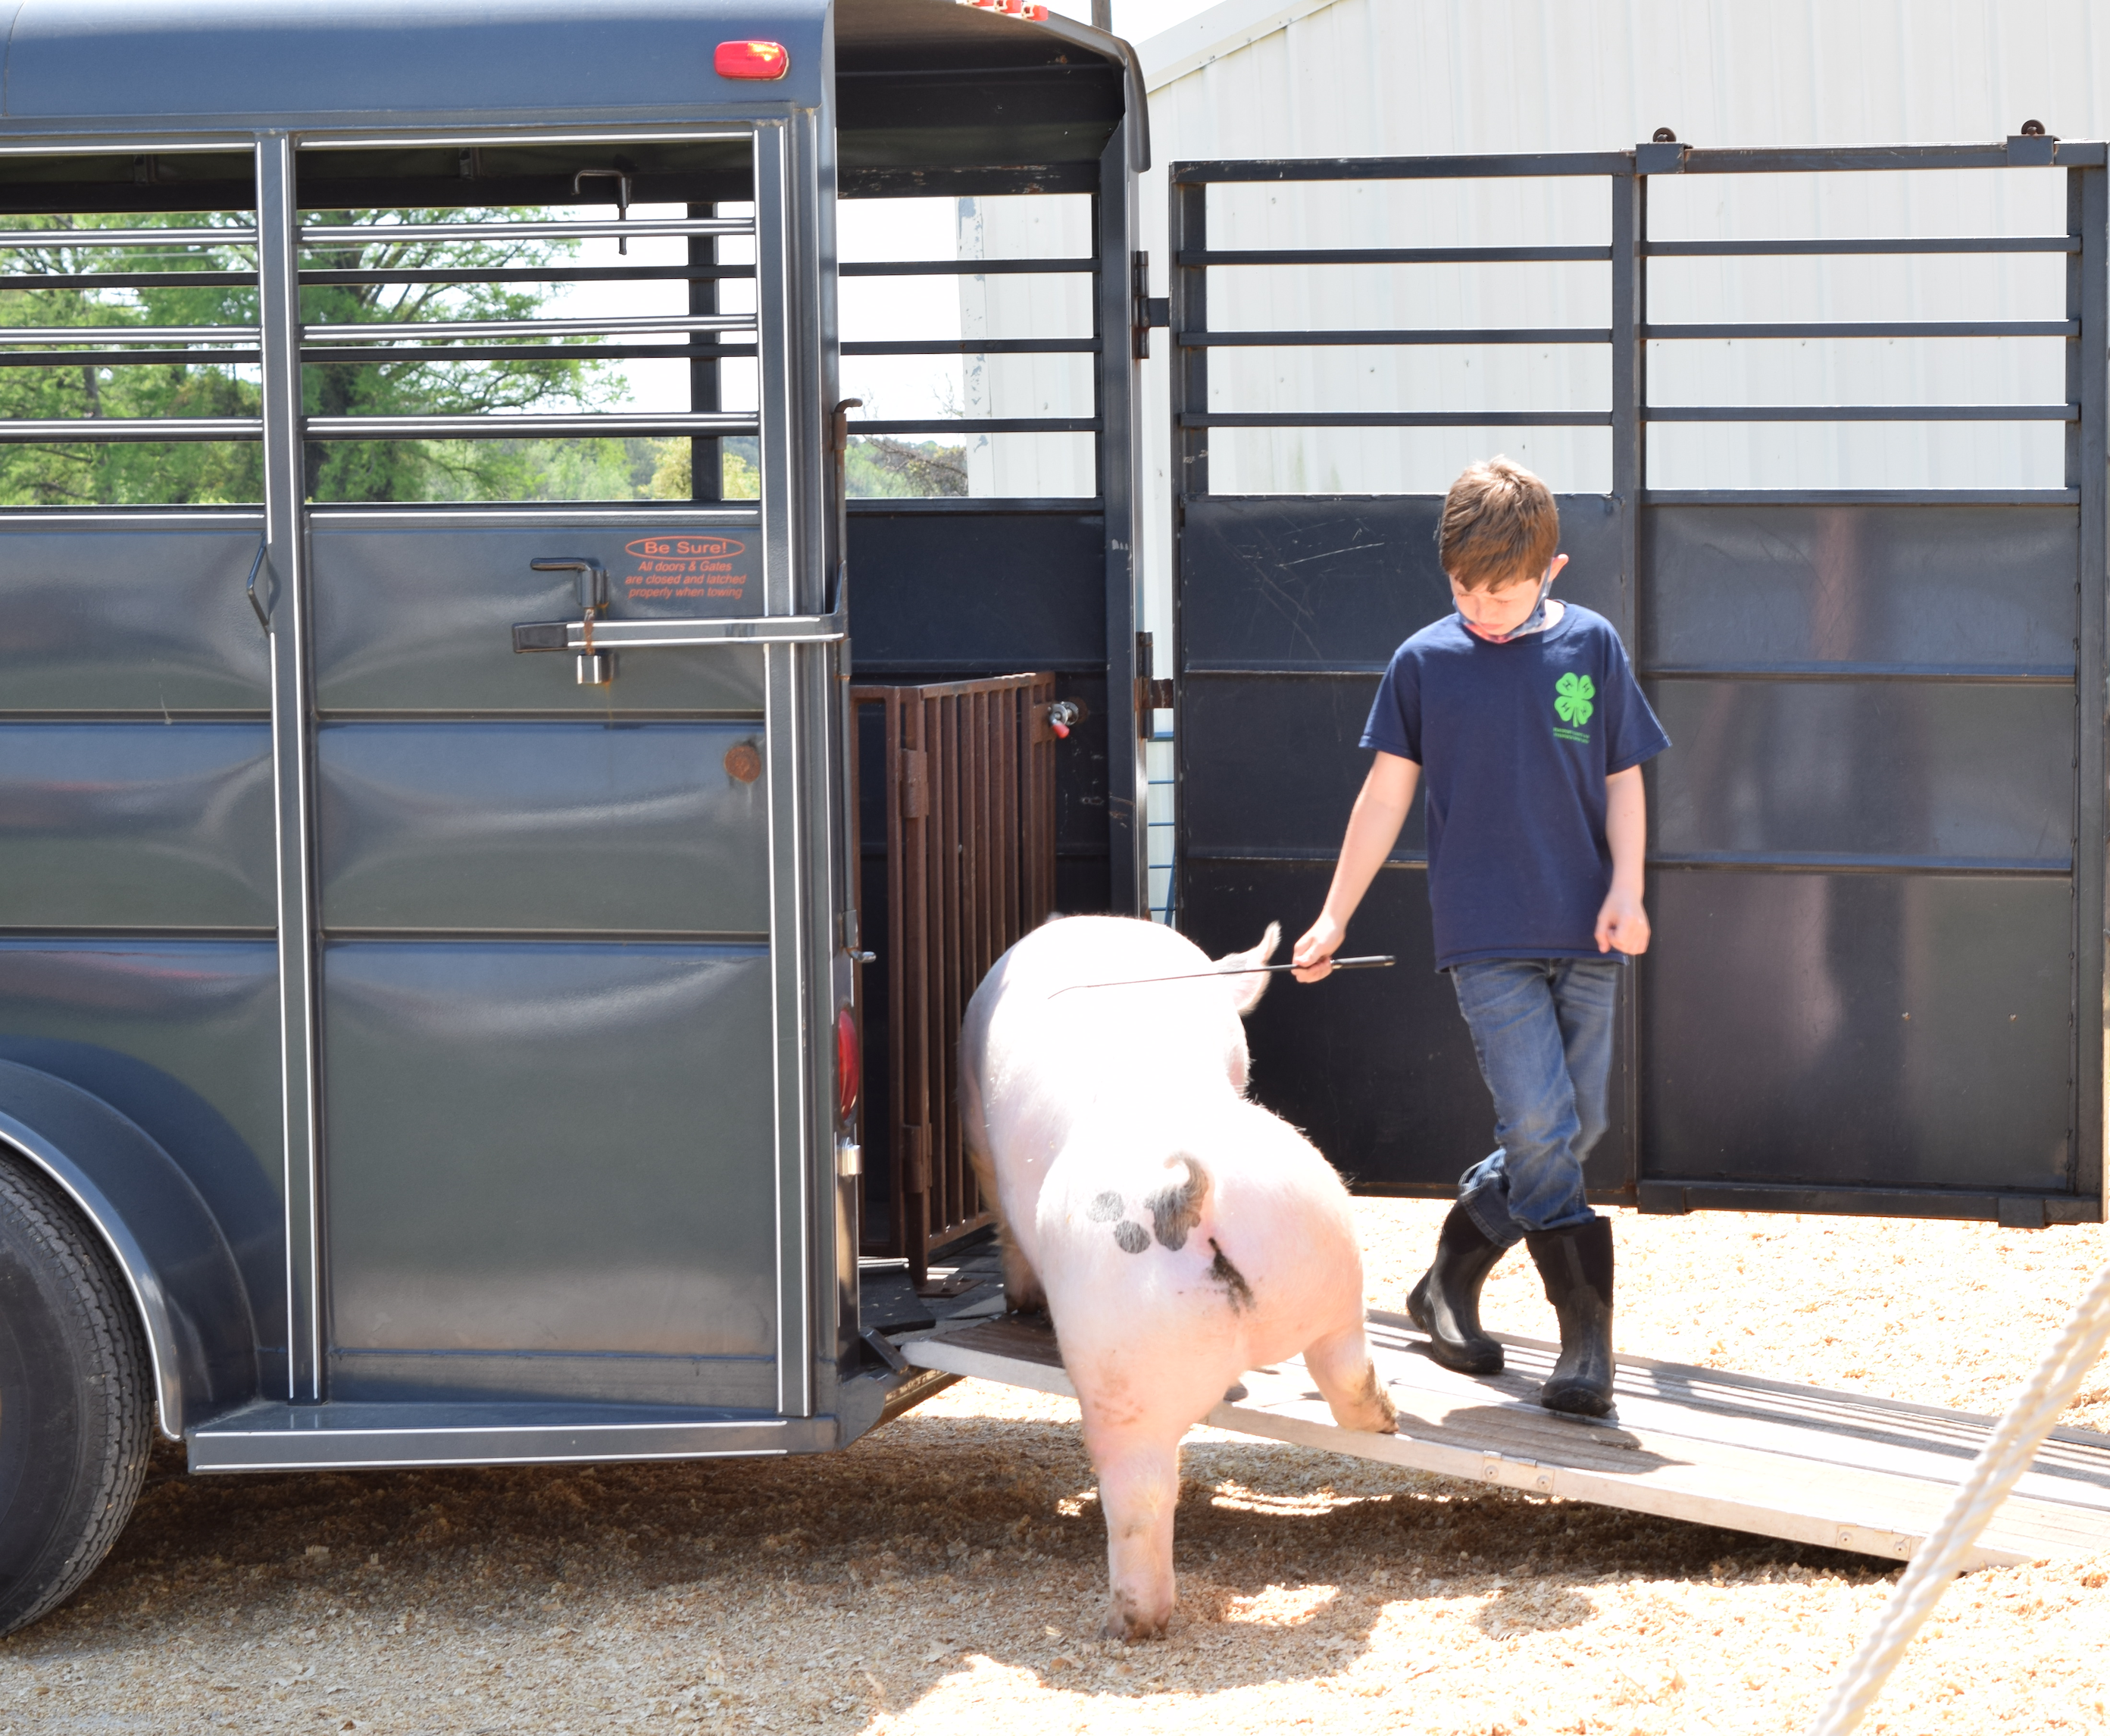 Livestock Exhibitor with their hog